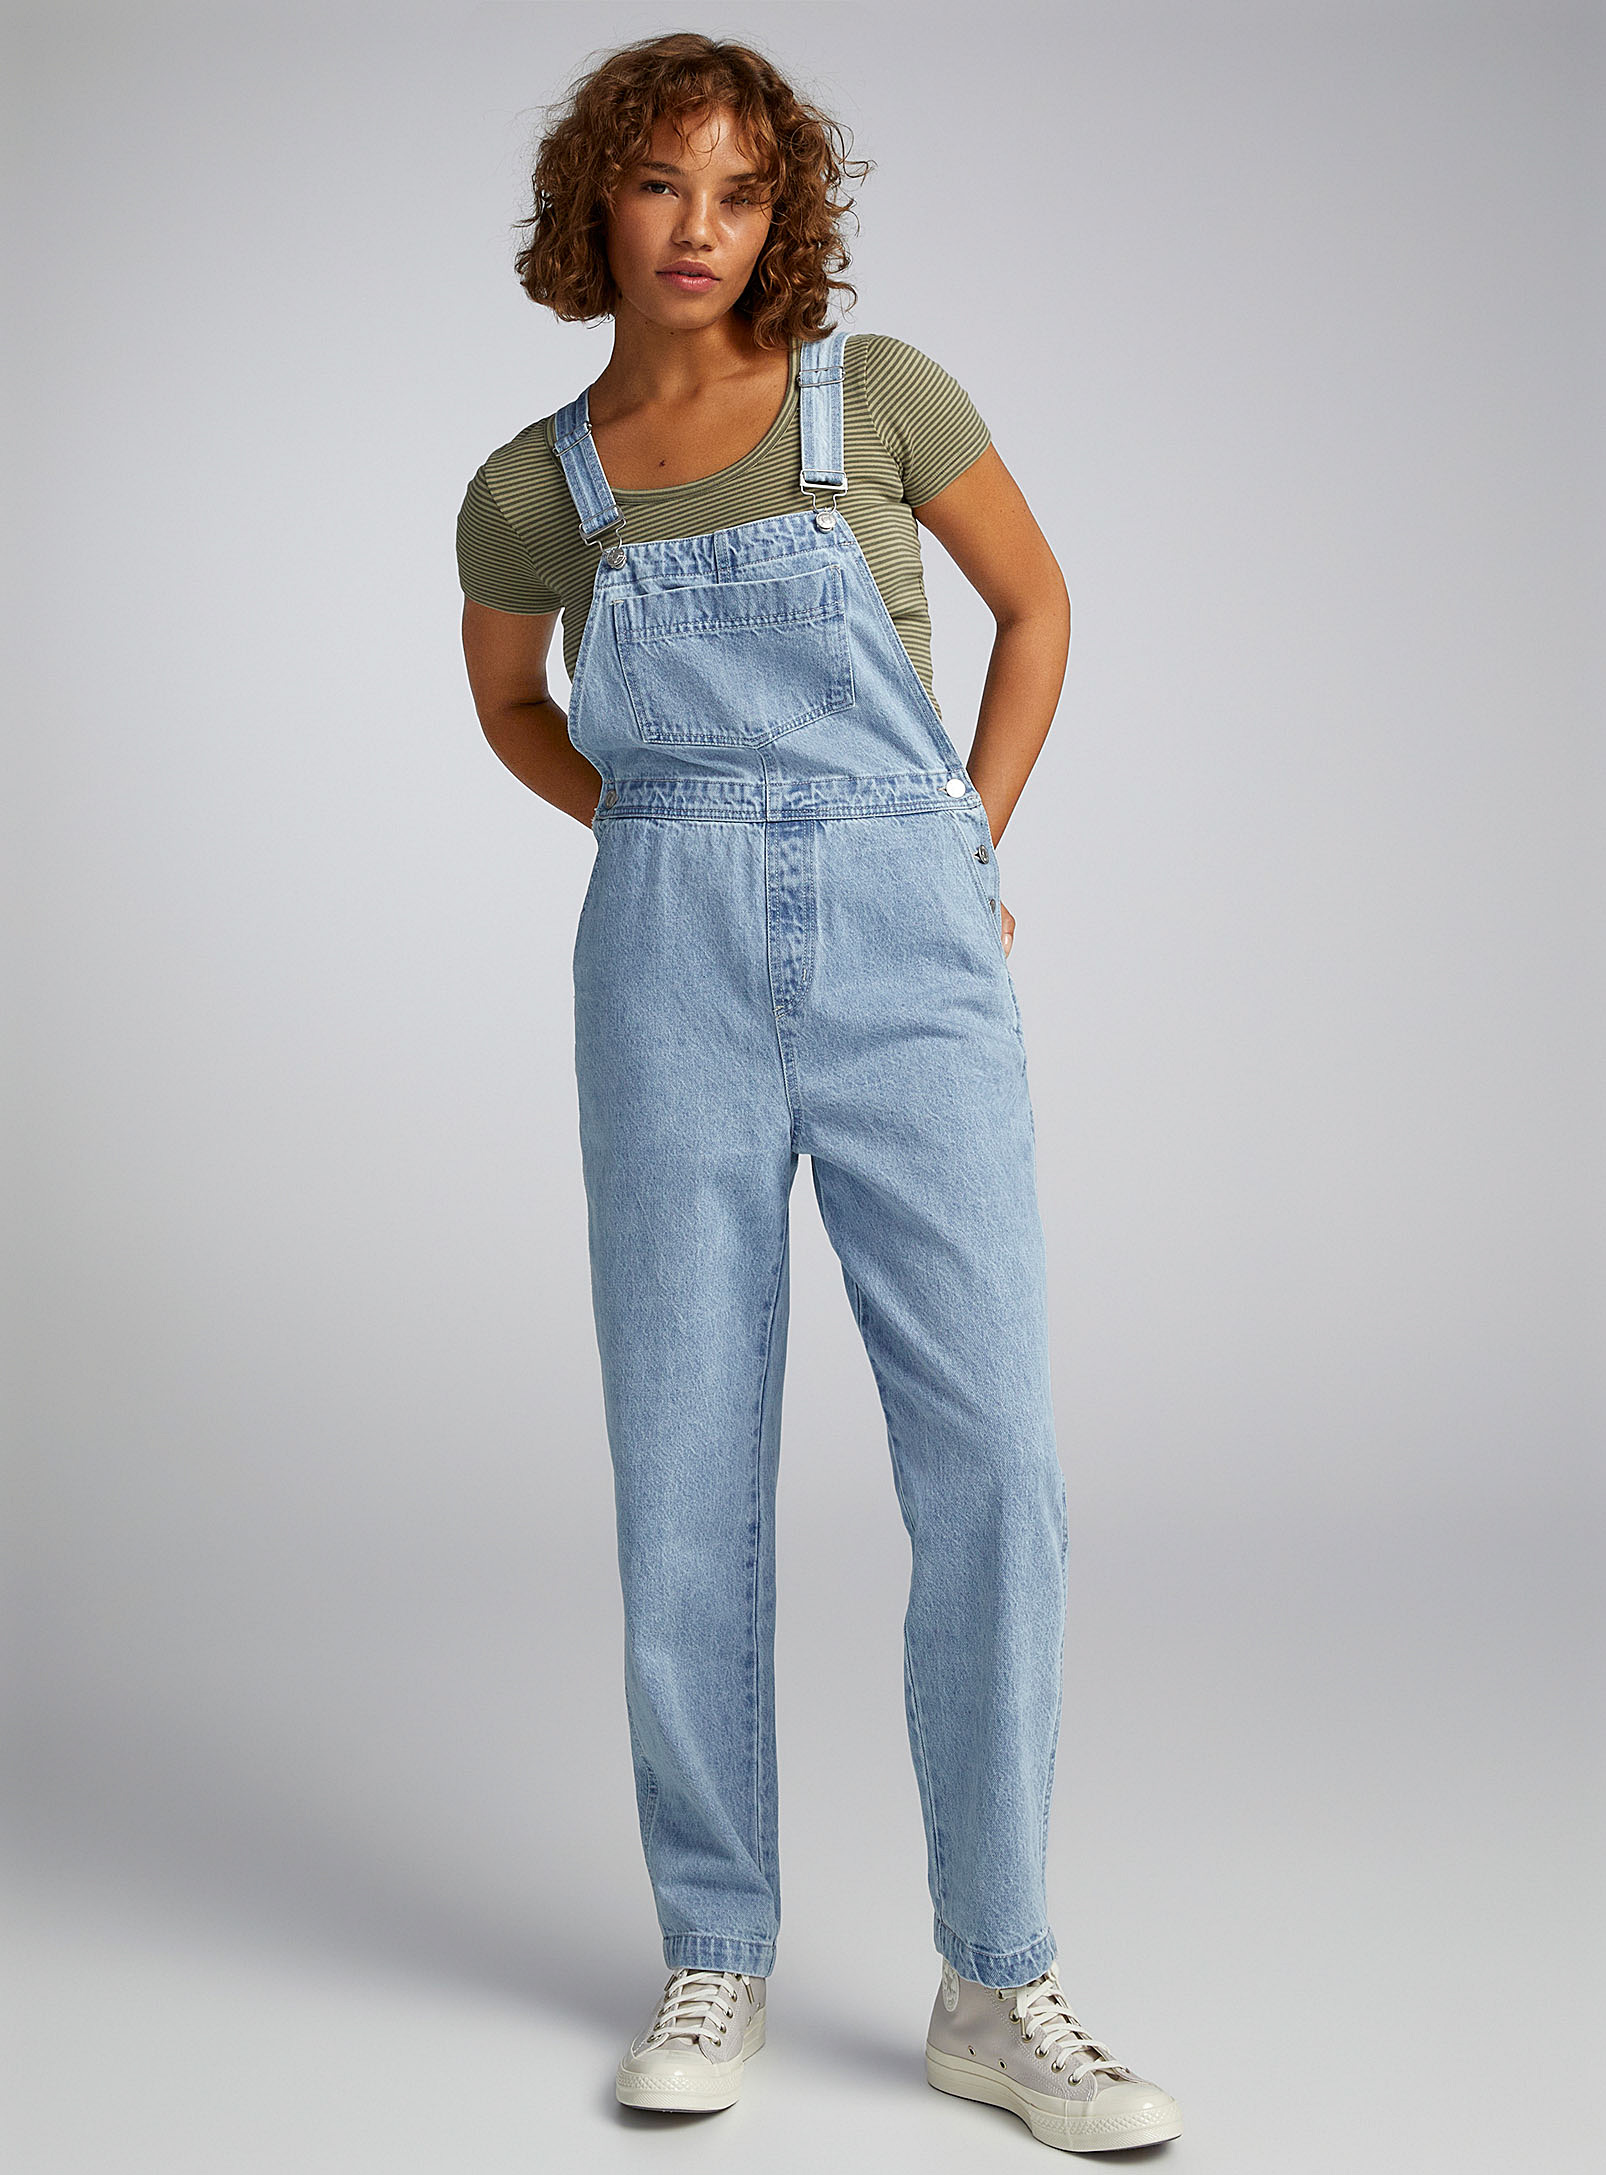 Twik Recycled Cotton Denim Tapered Overalls In Teal